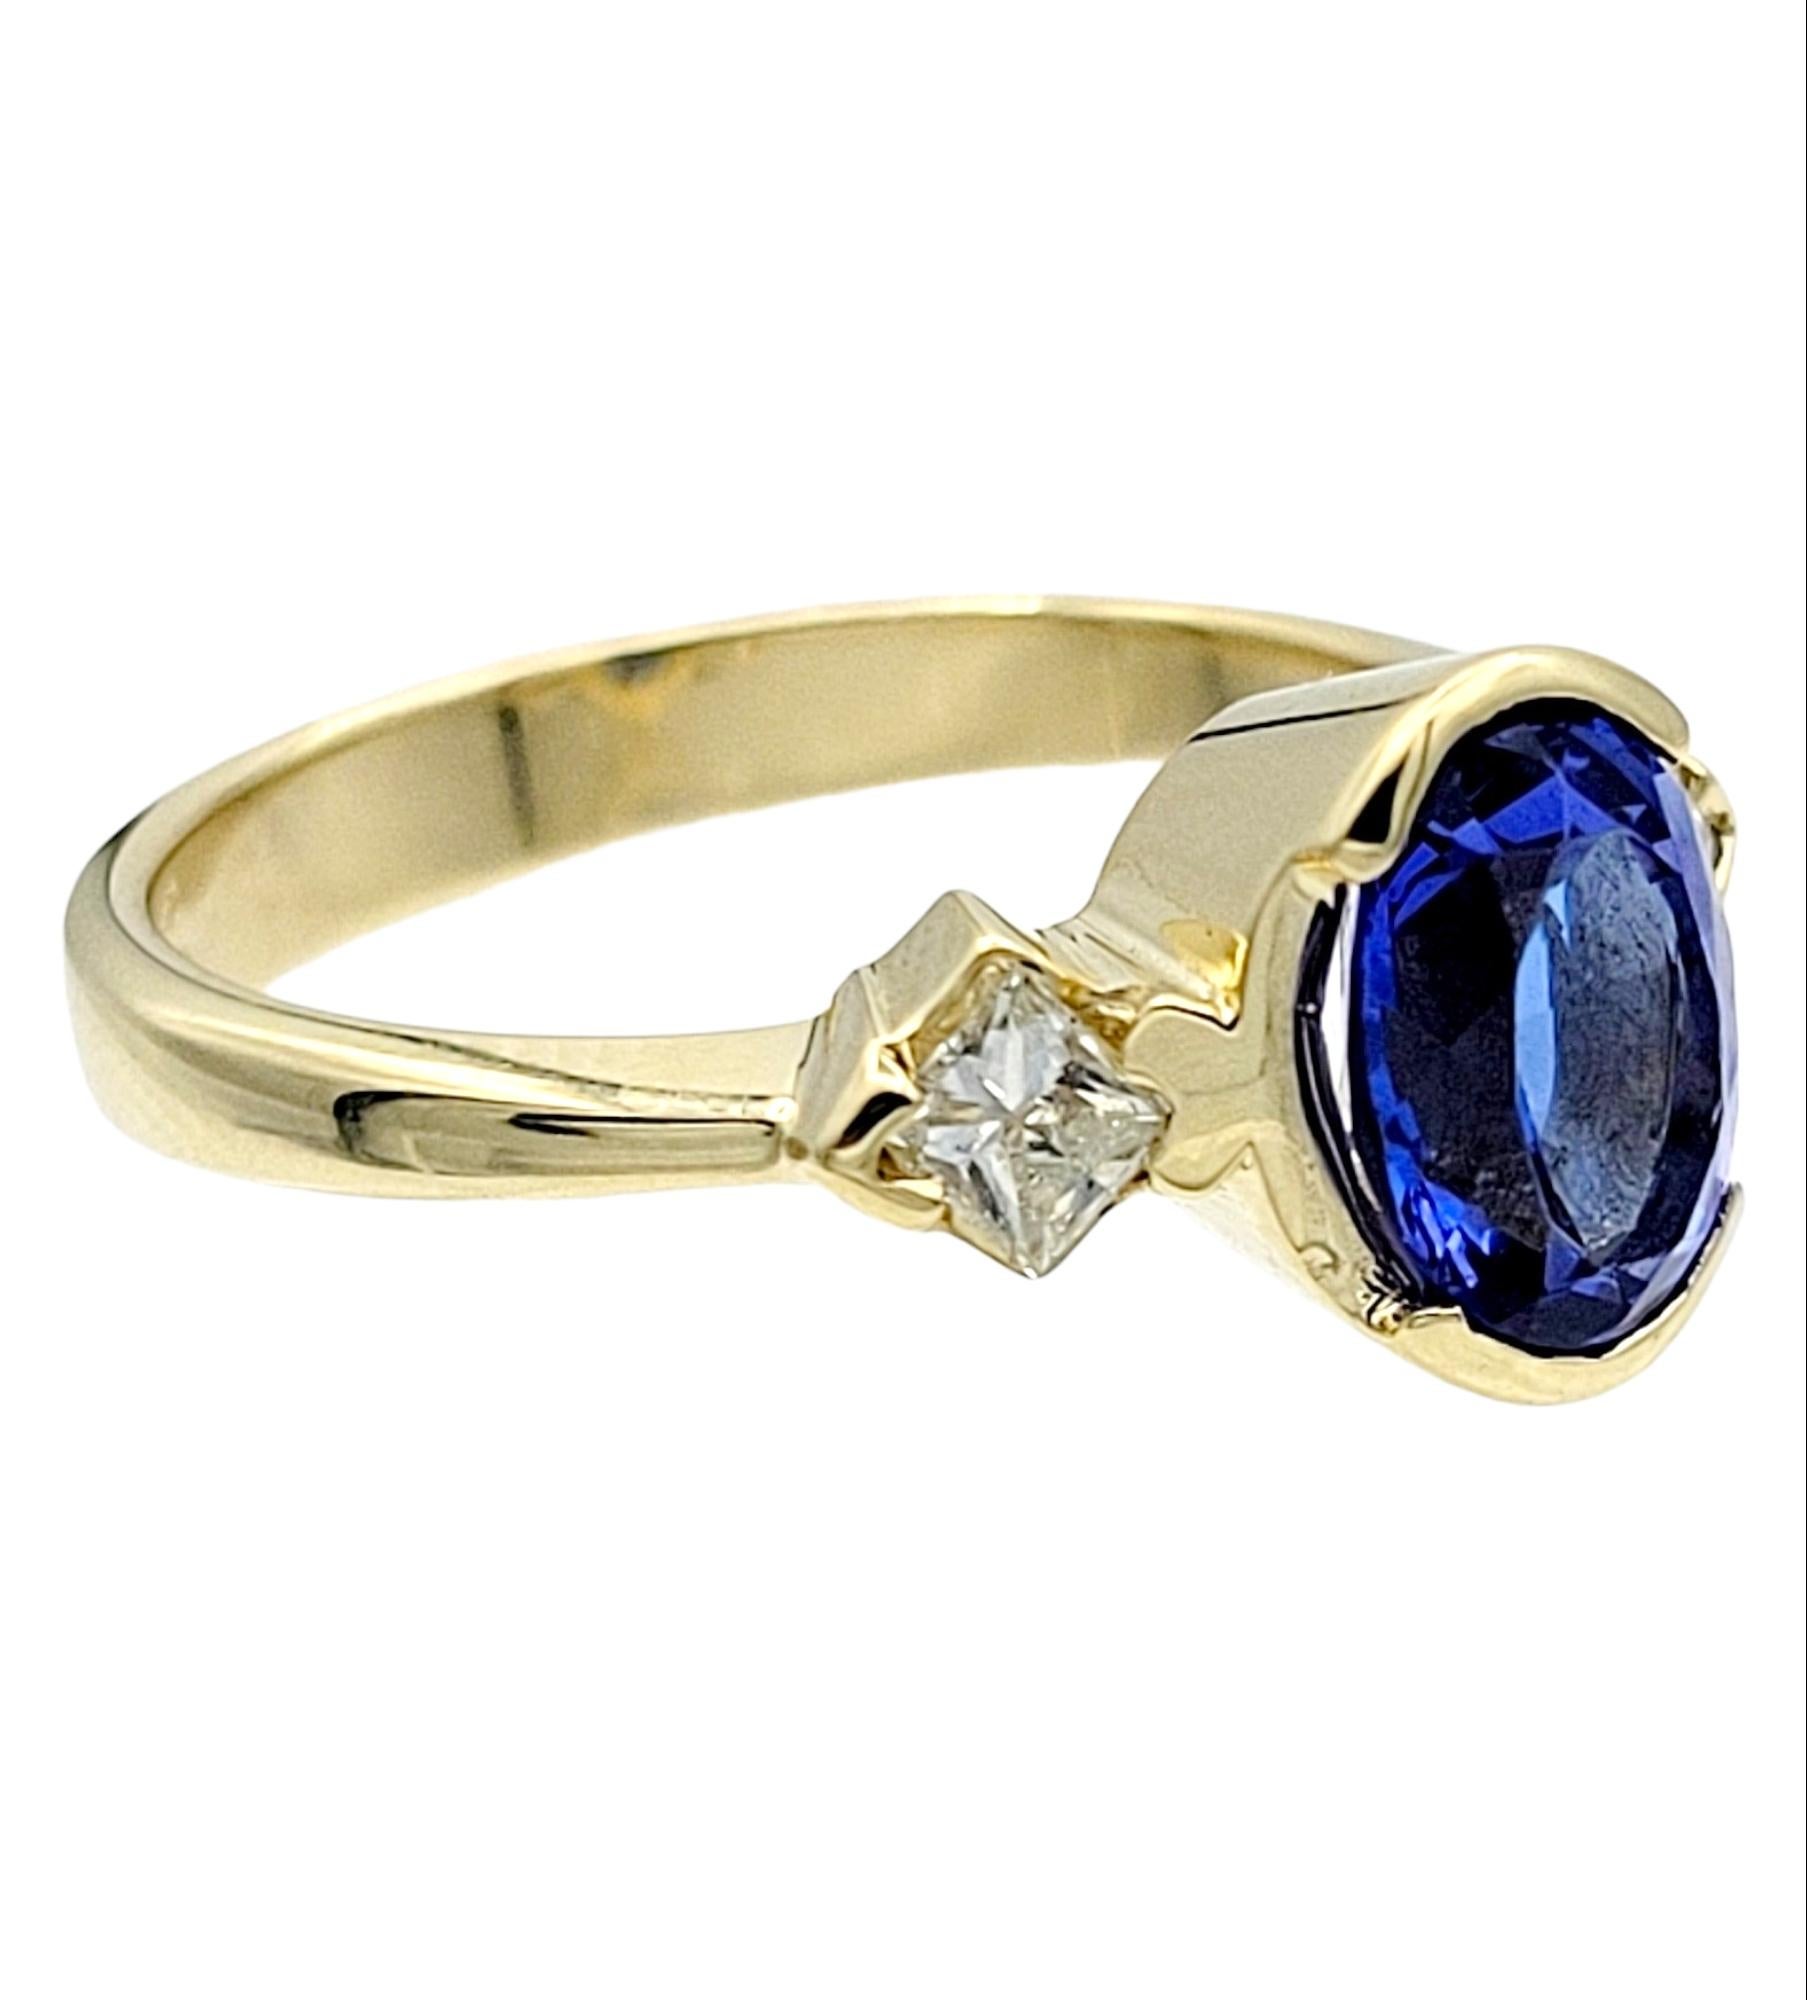 Ring Size: 7 

Featuring an exquisite three-stone tanzanite and diamond ring in polished 14 karat yellow gold. This stunning piece showcases the captivating beauty of tanzanite, renowned for its mesmerizing violet-blue hue, surrounded on either side